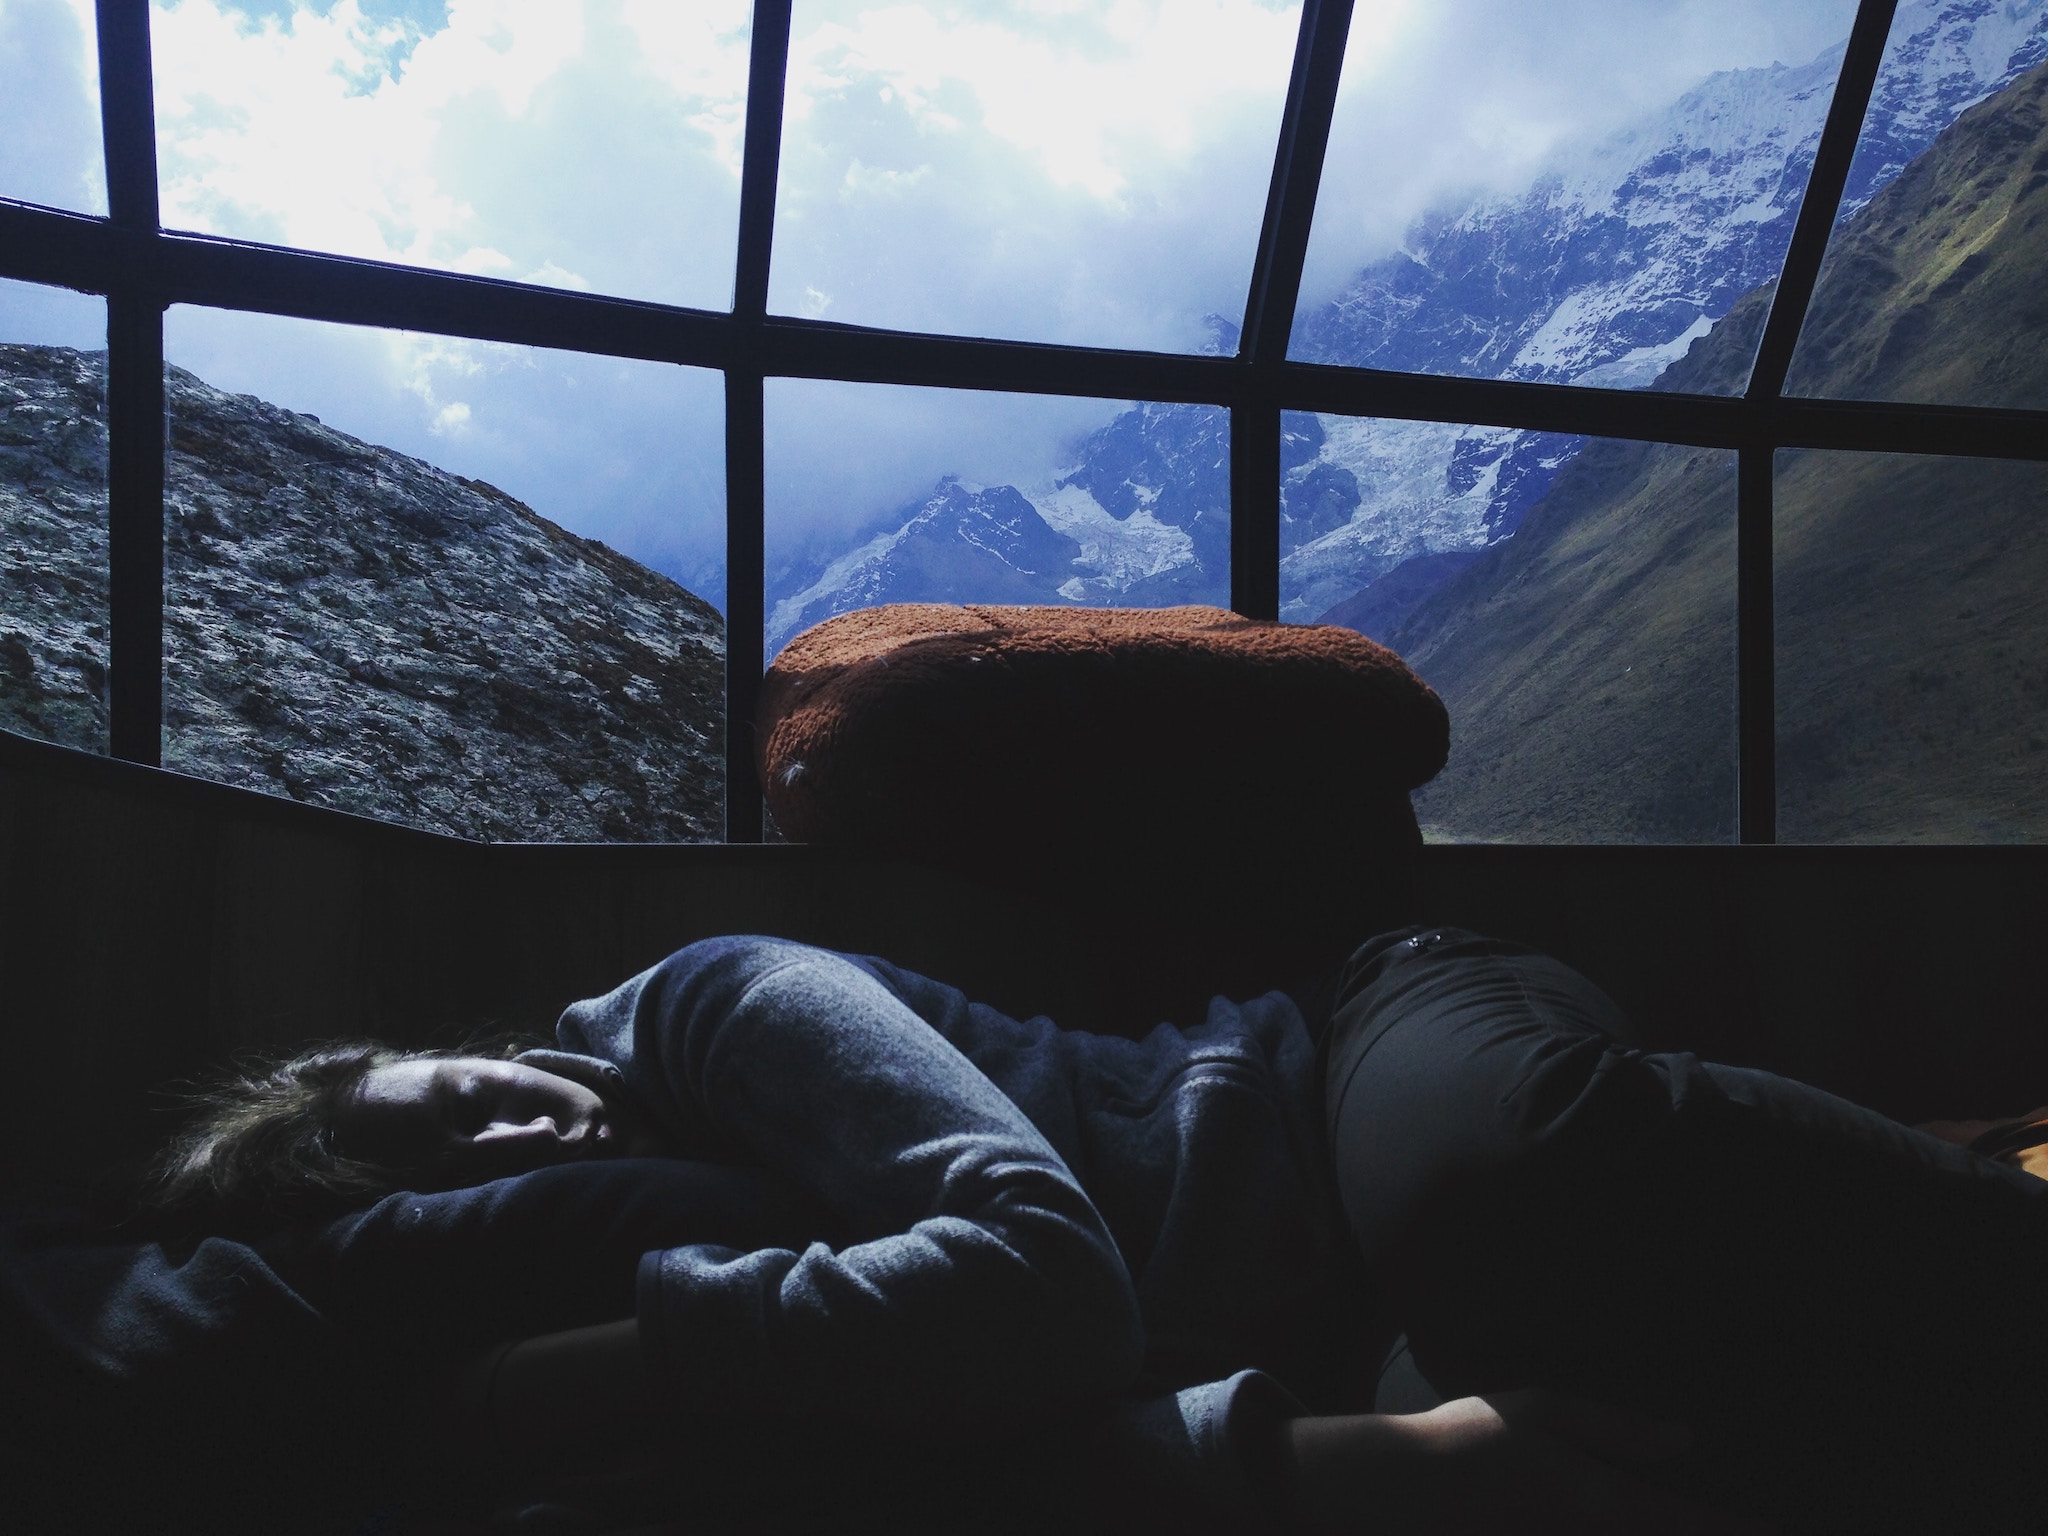 traveler sleeping under large windows in the mountains, likely jet lagged